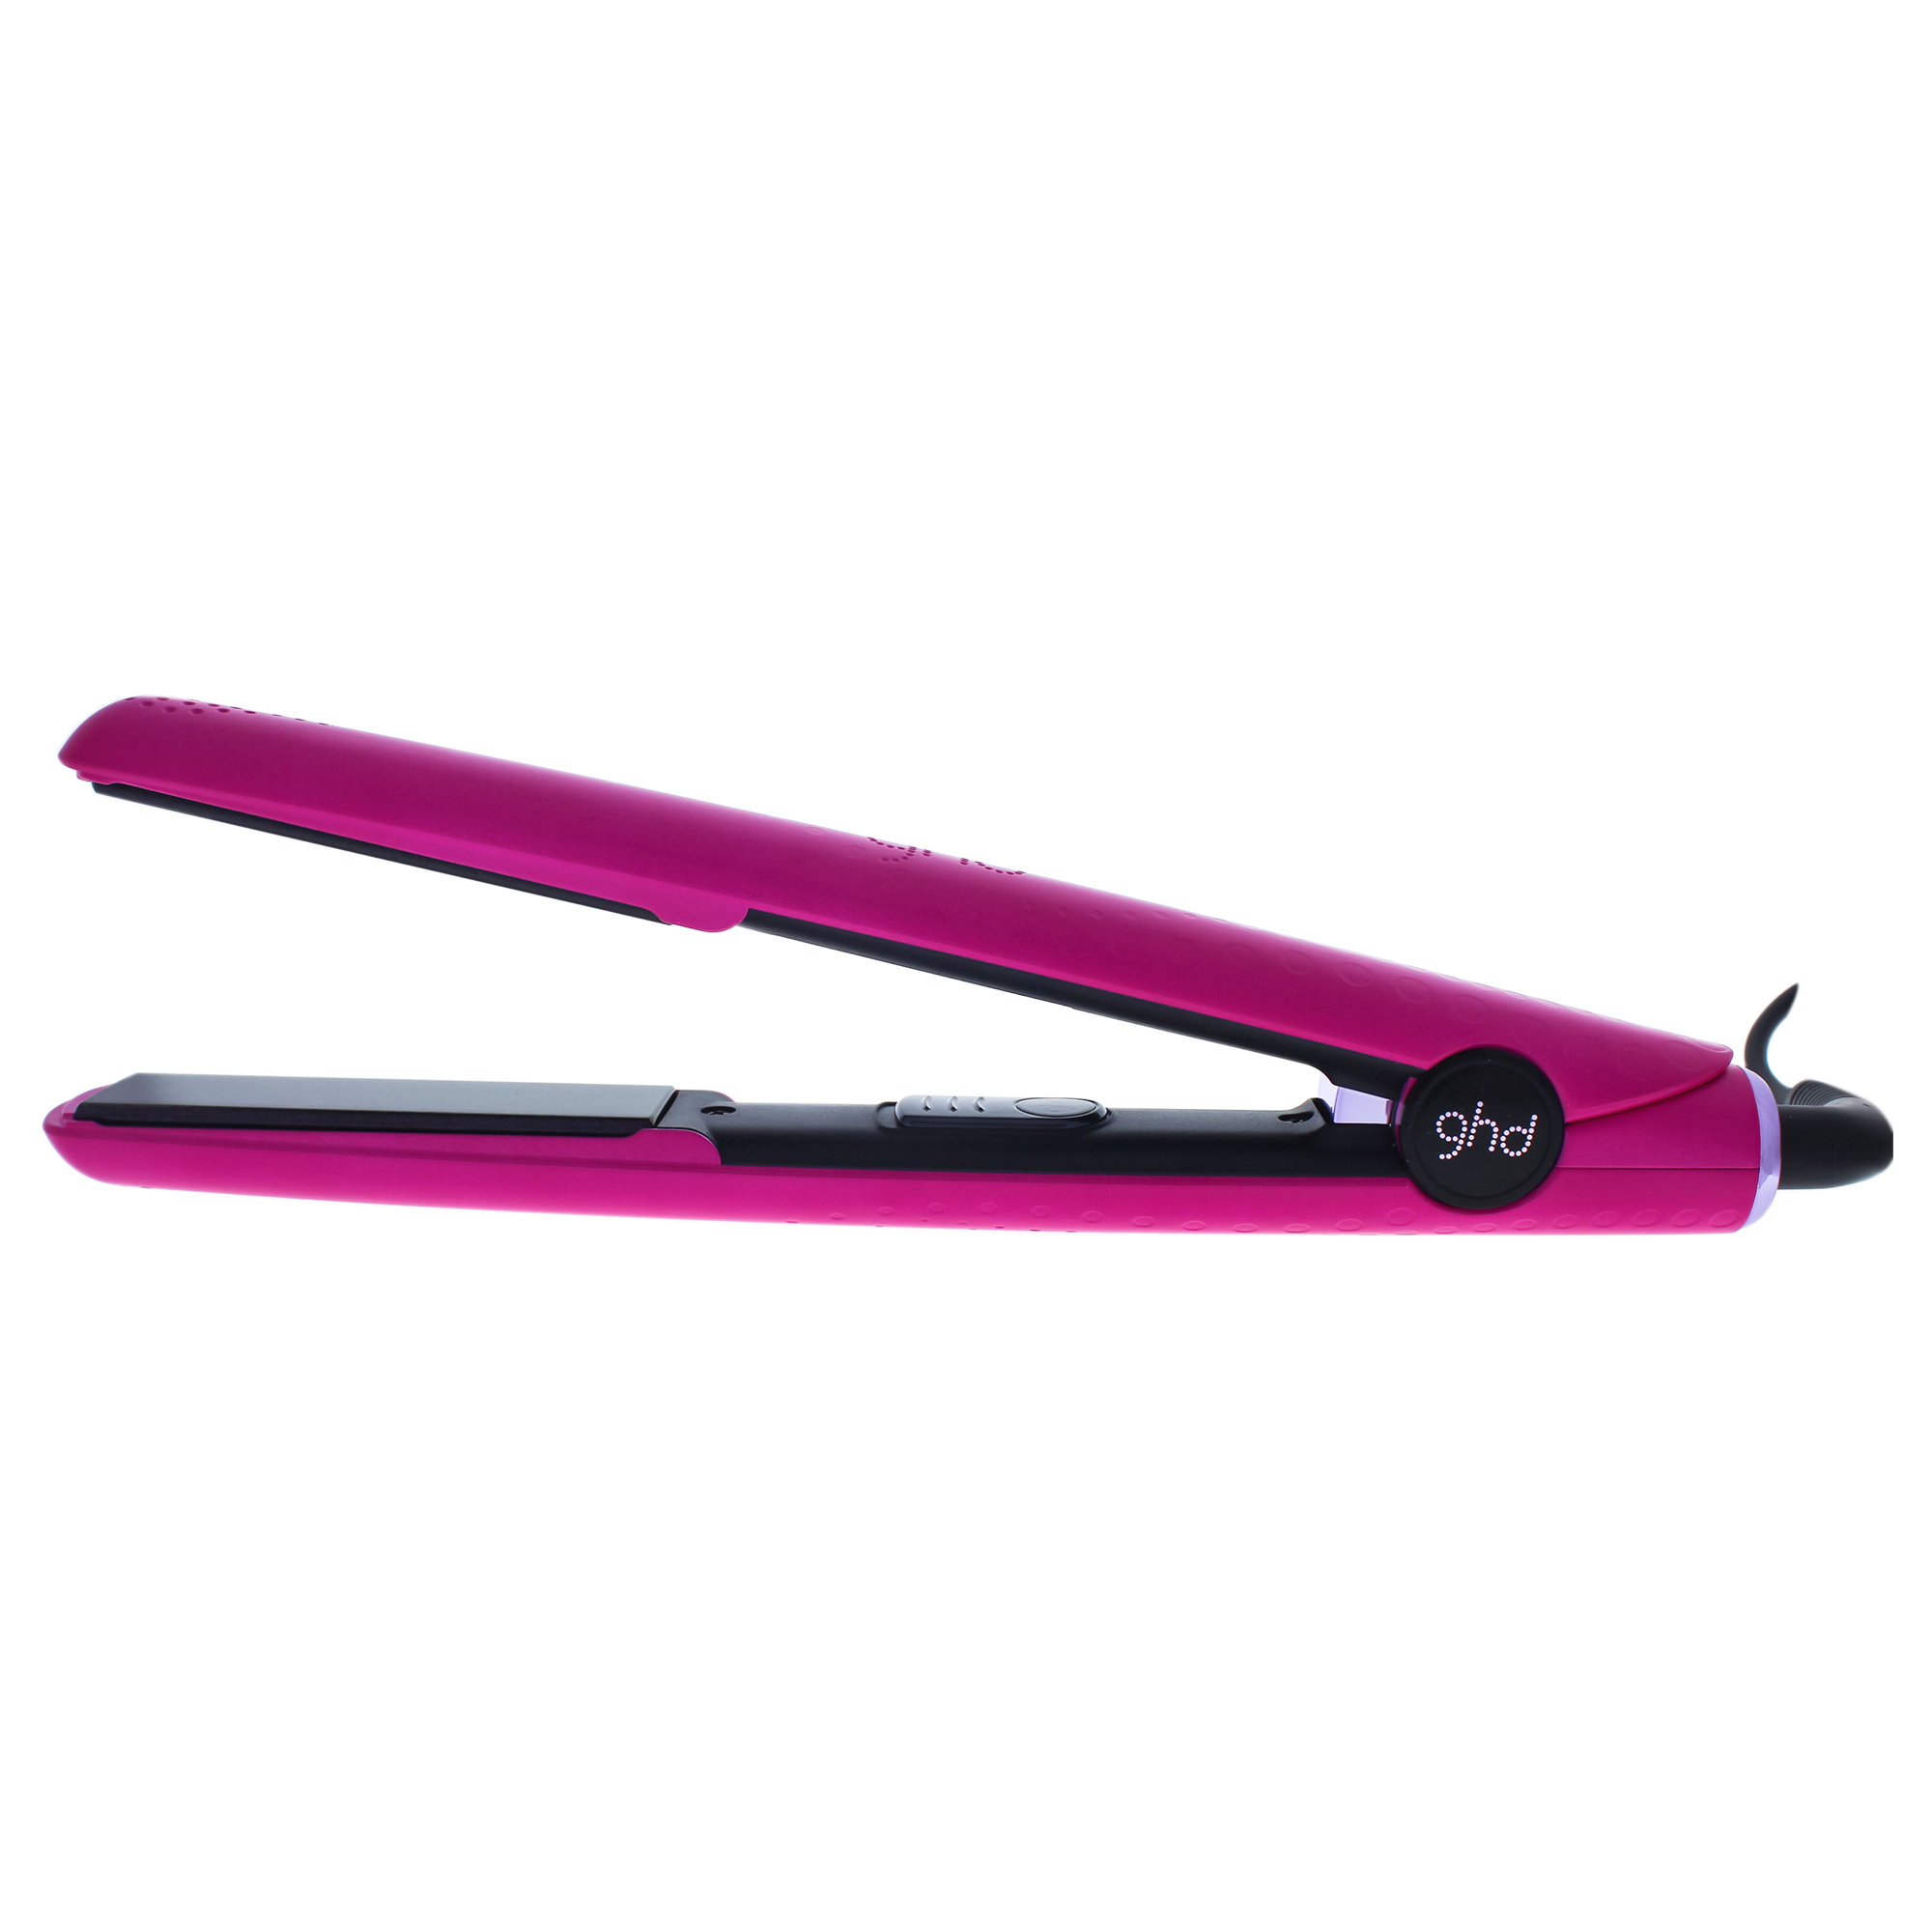 GHD Electric Pink Gold Styler Flat Iron, 1" - image 1 of 10